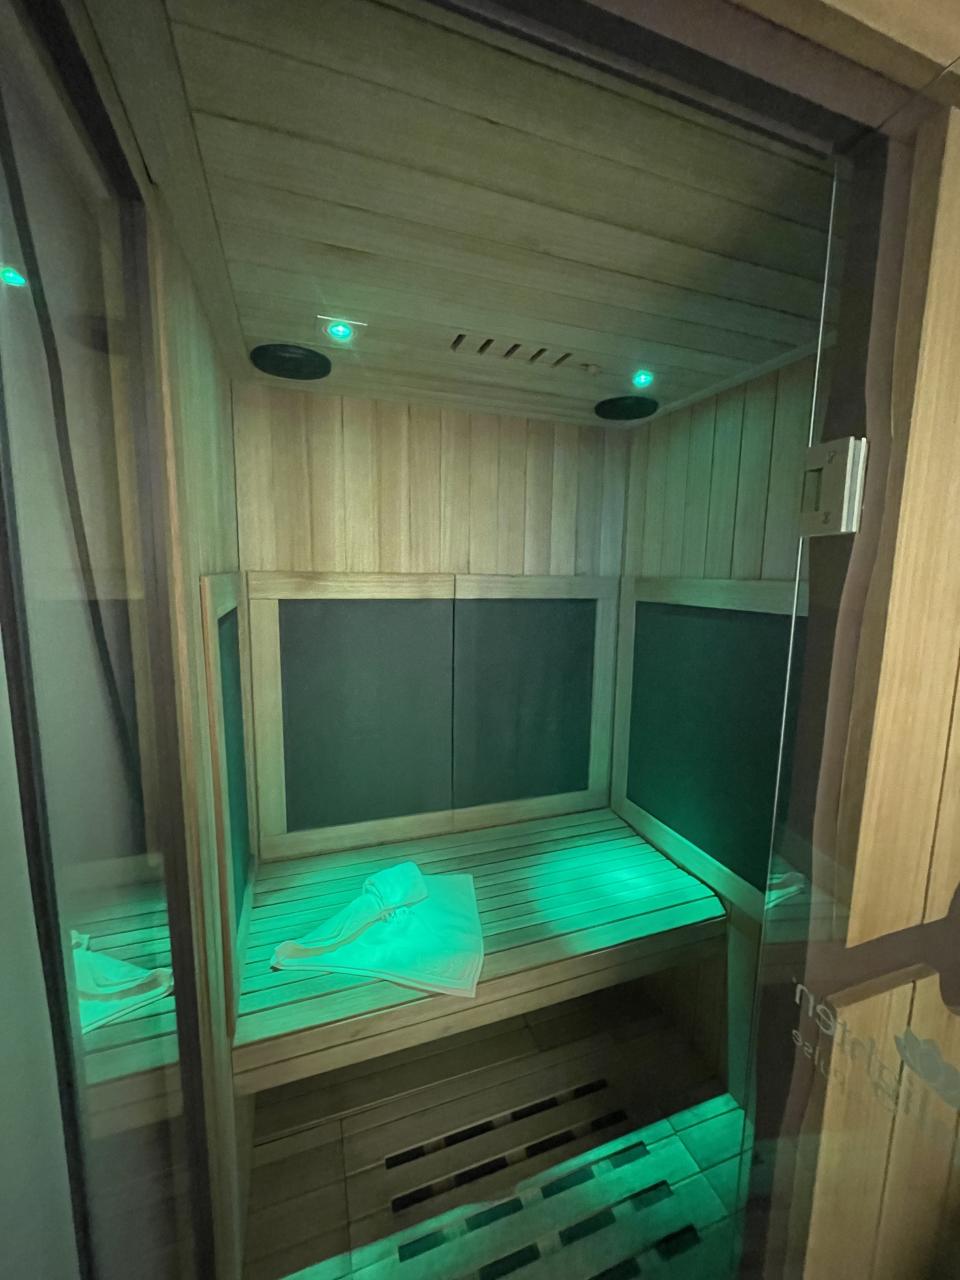 Infrared sauna green lights. (Getty Images)